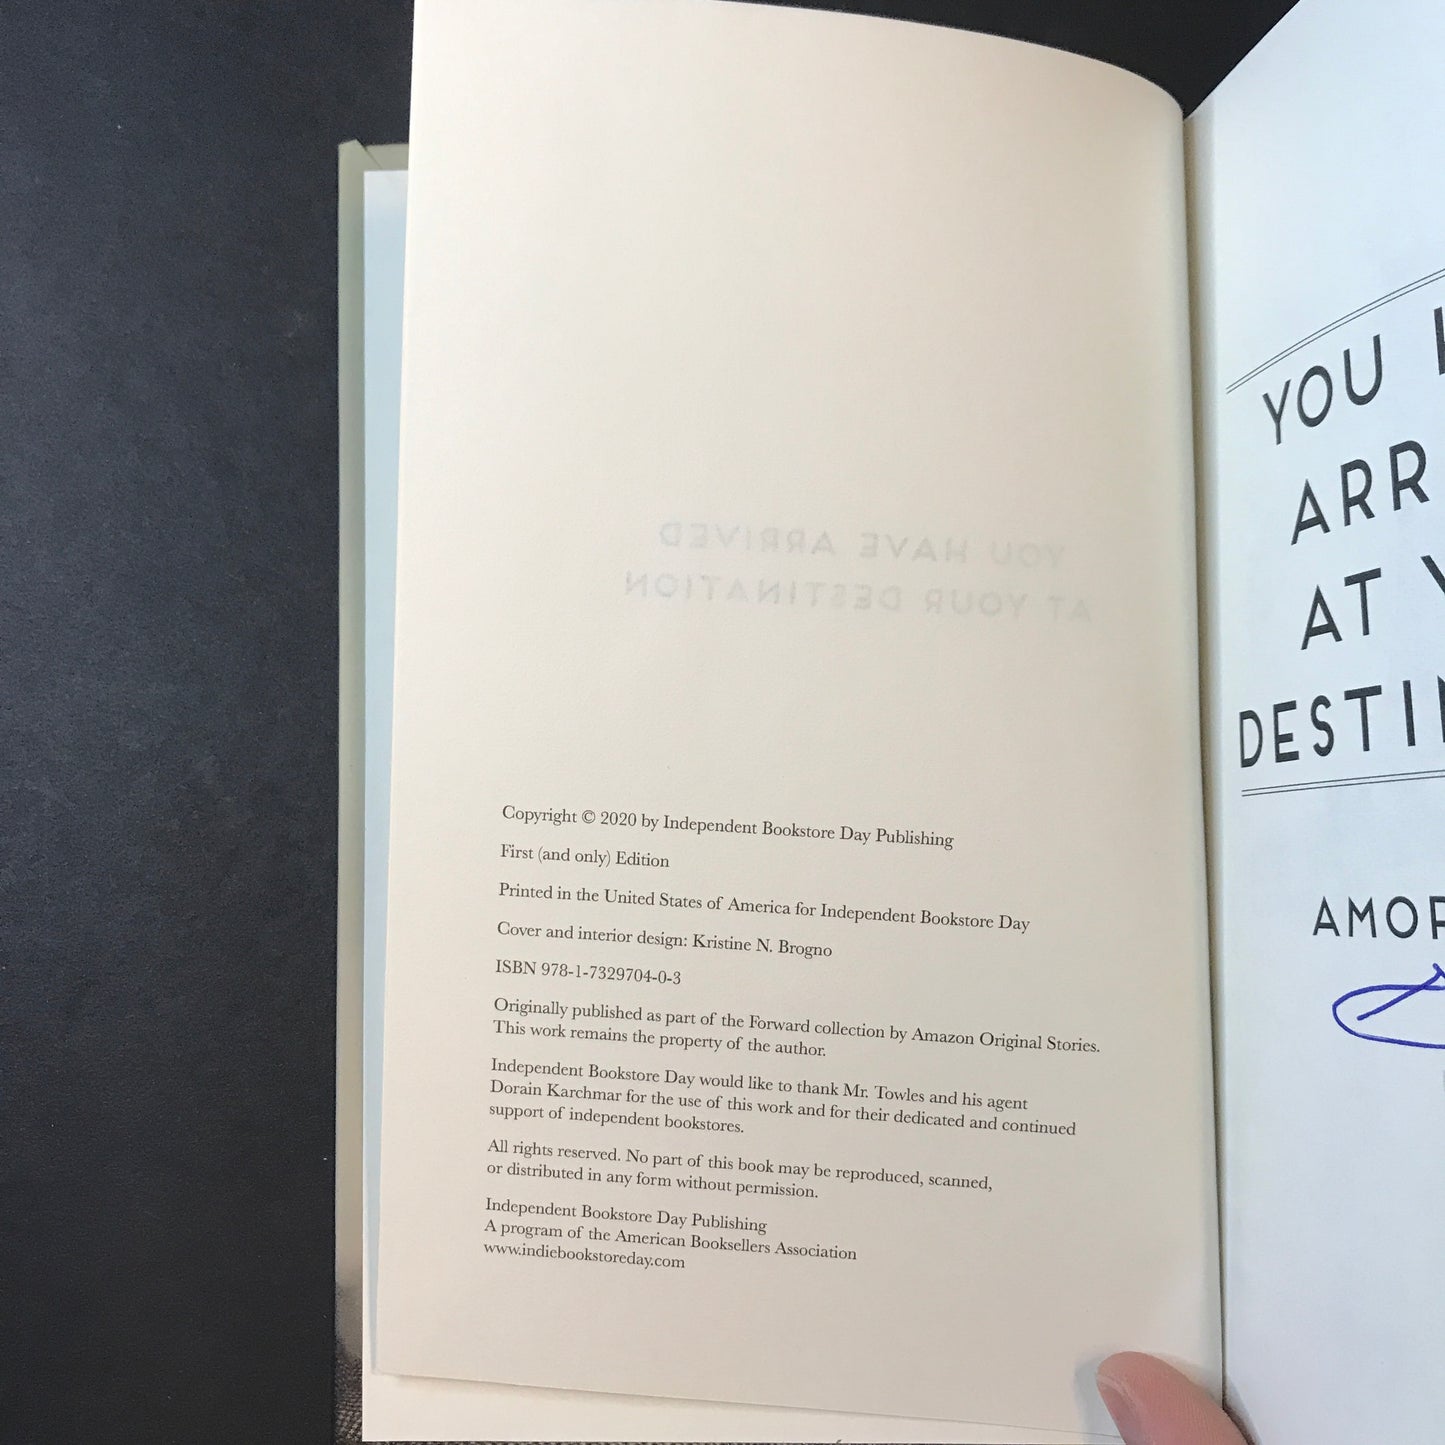 You have Arrived at Your Destination - Amor Towles - Signed - 1st Edition - 2020